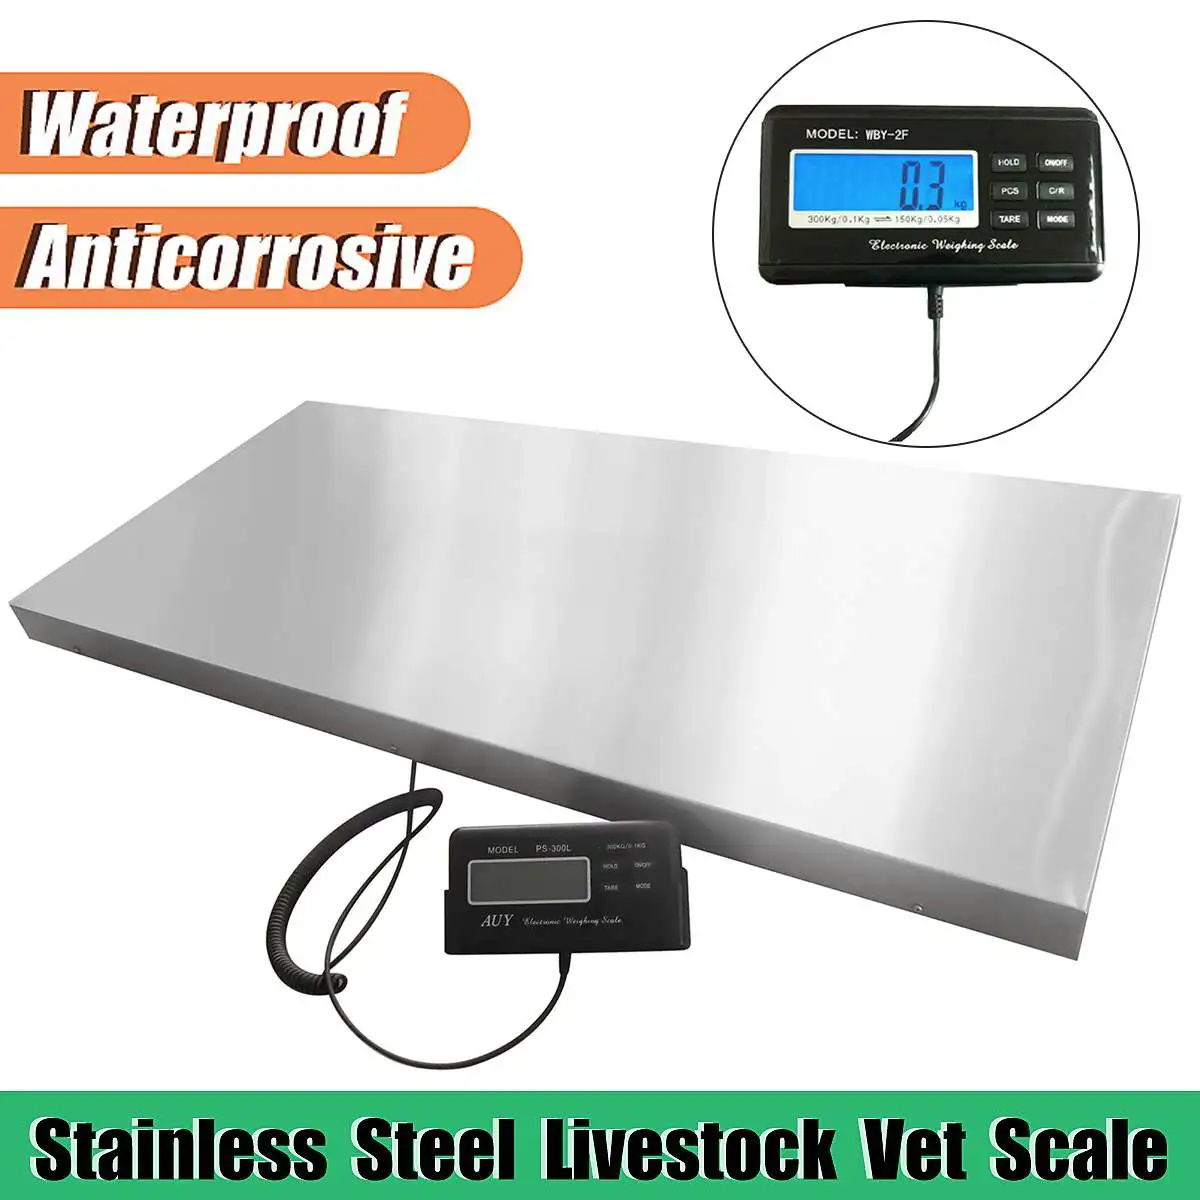 

Electronic Balance Floor Bench Heavy Weight Commercial Scales Digital Platform Scales Animal/Parcel Platform Scale 300kg Tools